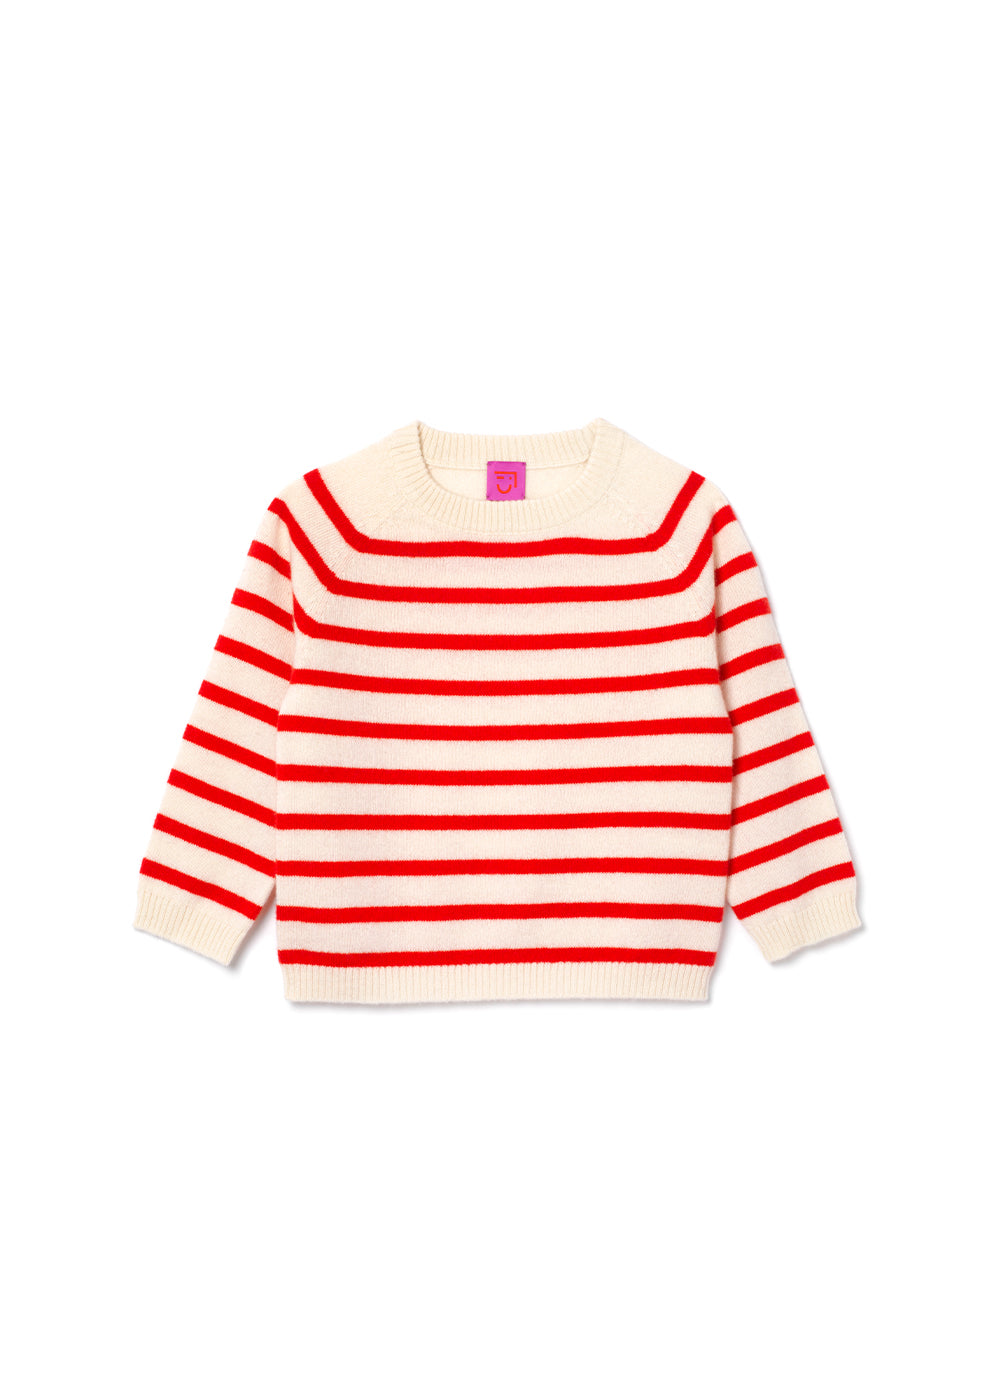 Maisy Striped Jumper - 2Y-3Y / Ivory/Rouge Red Stripes